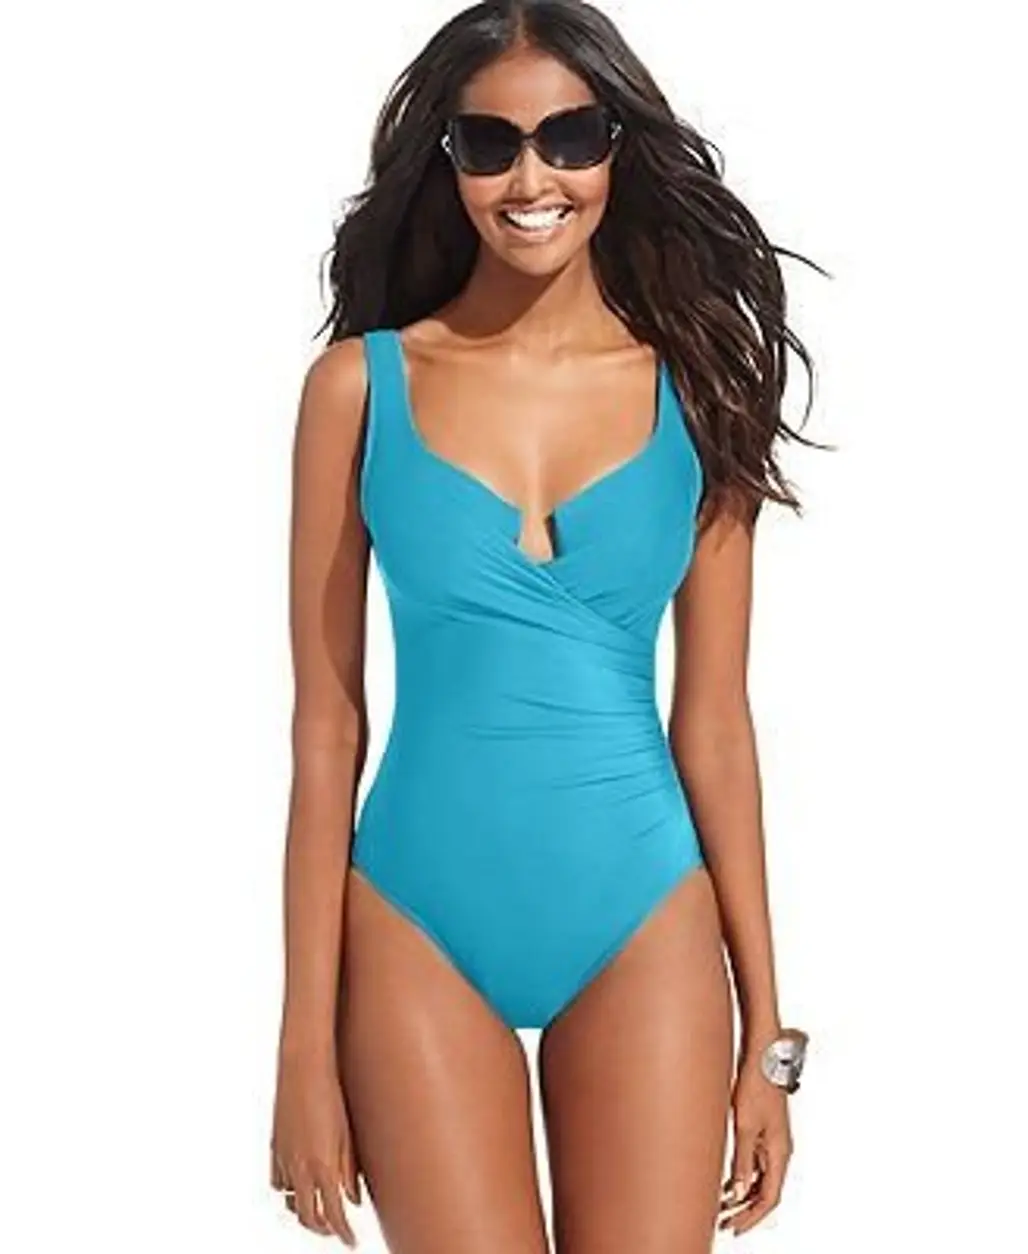 swimwear,clothing,one piece swimsuit,maillot,swimsuit top,